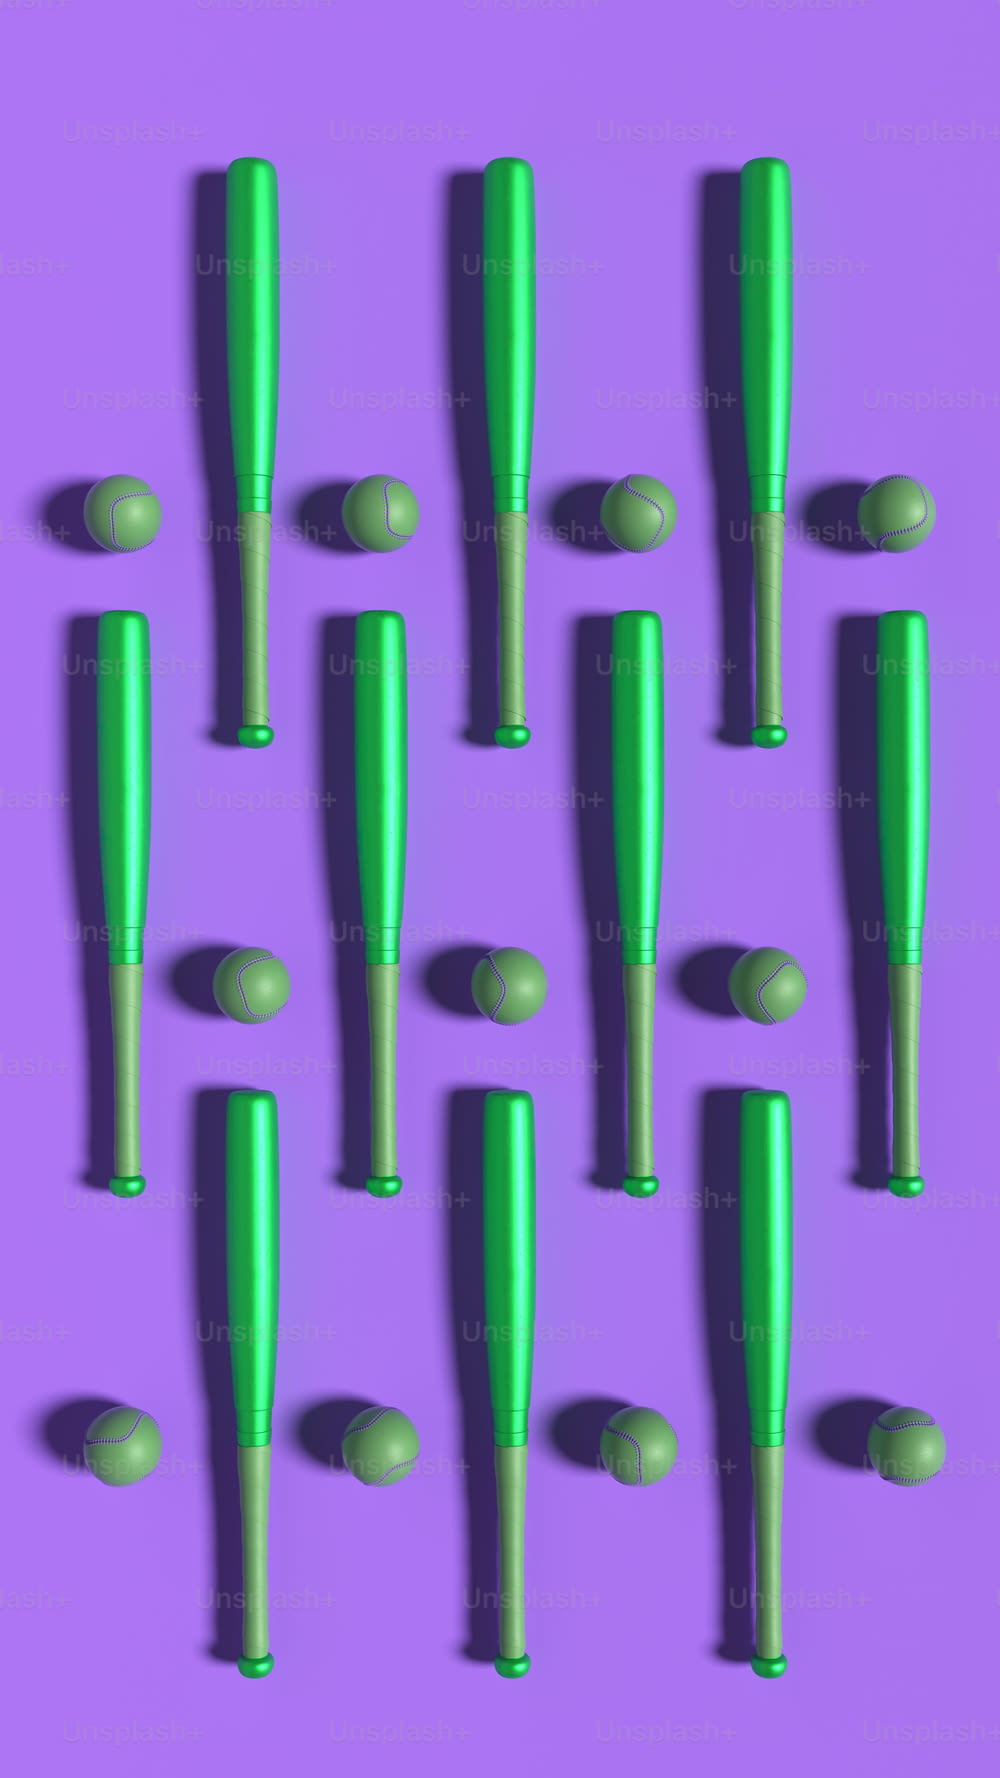 a group of green plastic objects on a purple background